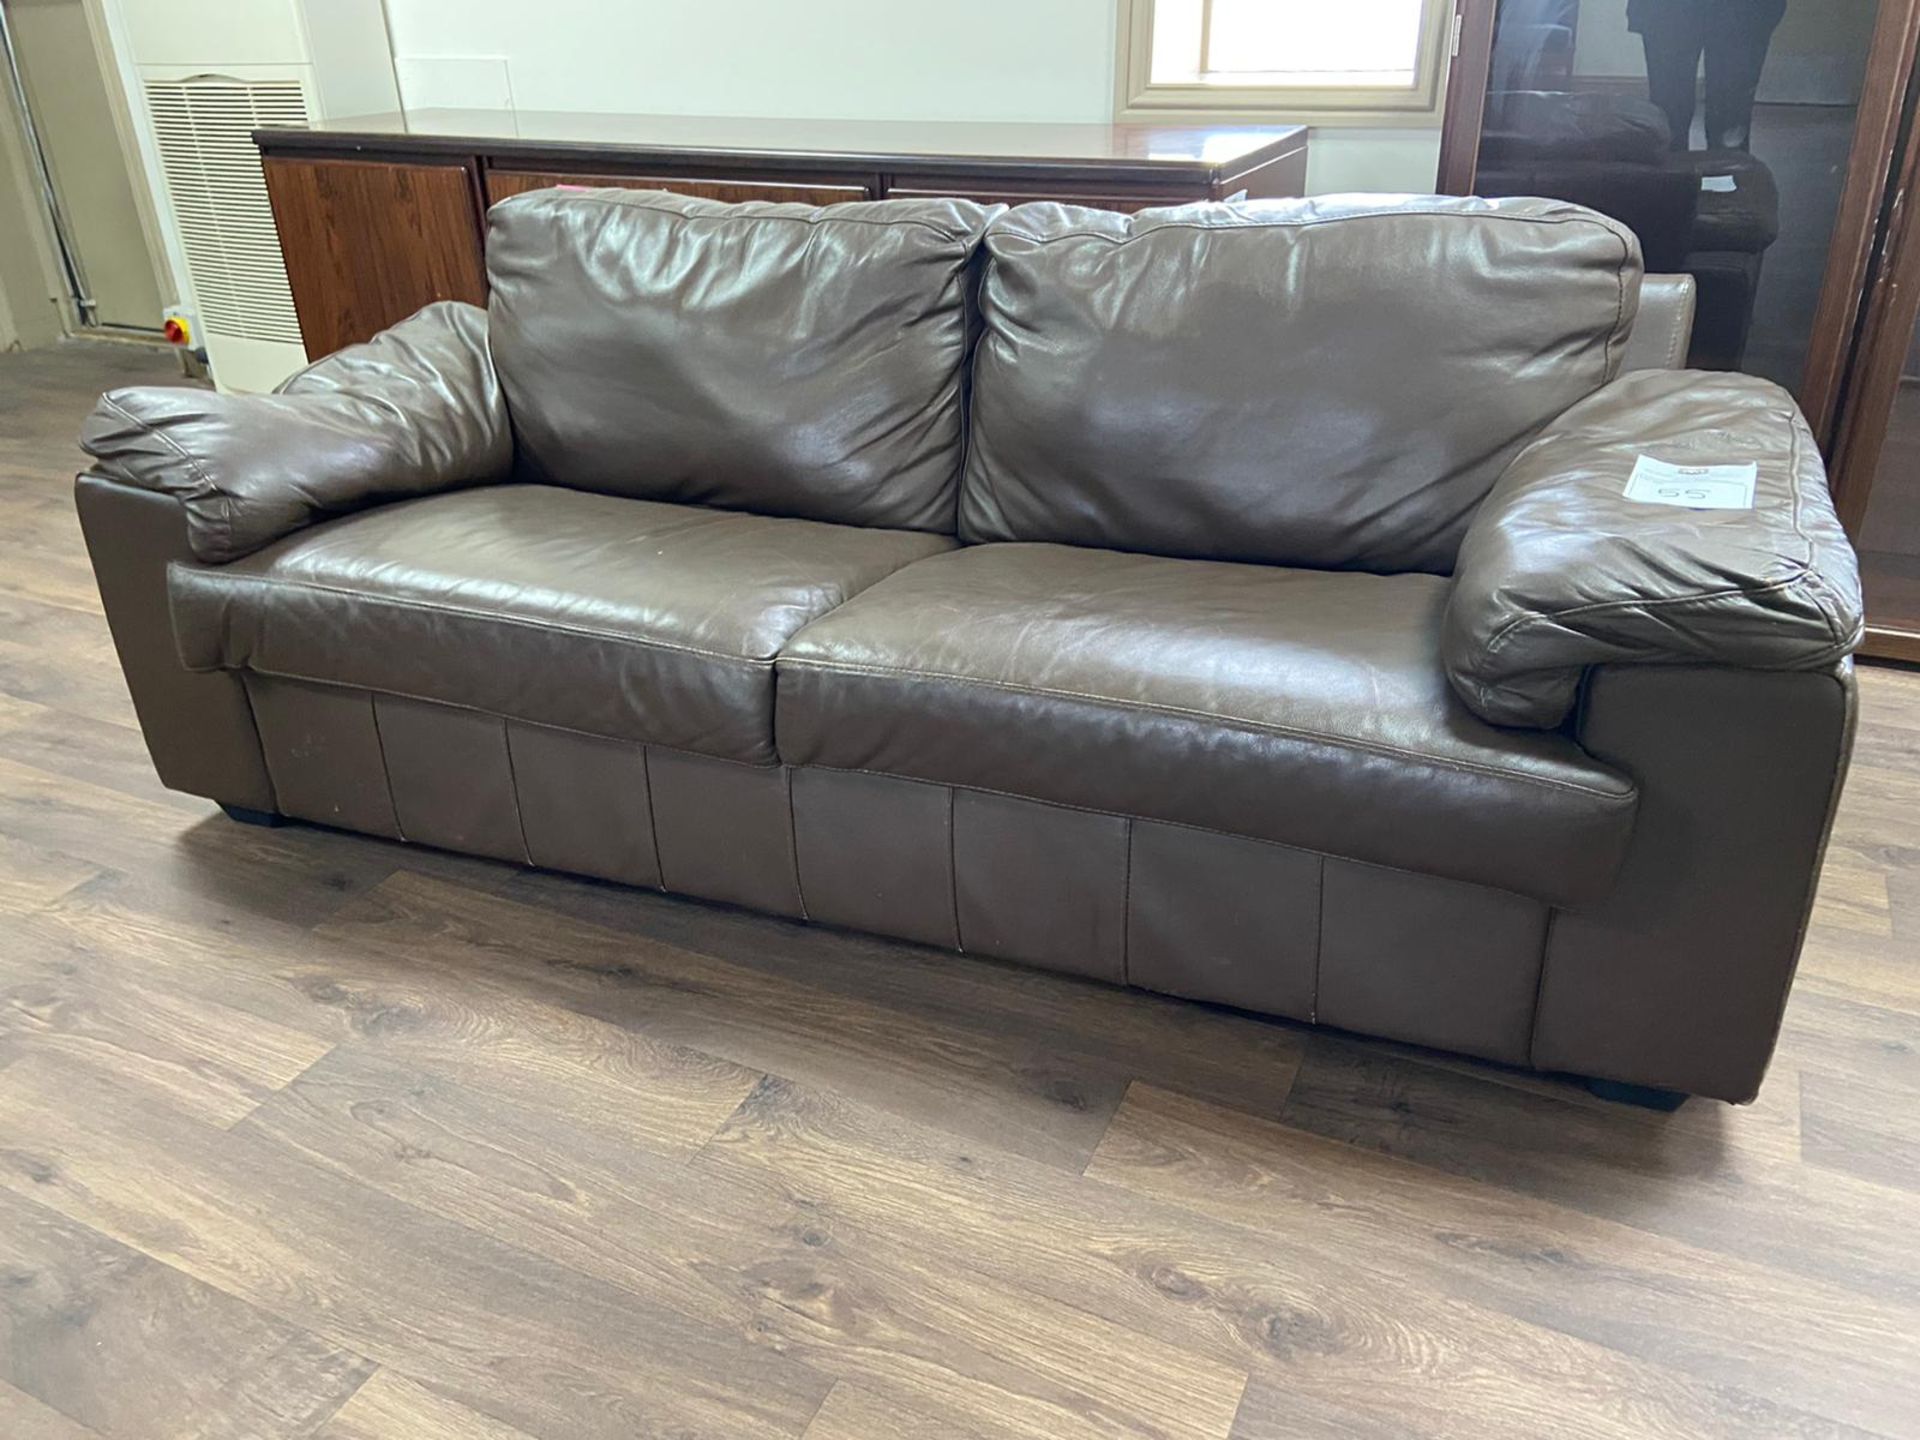 Brown 3 Seater Leather Sofa - Image 2 of 4